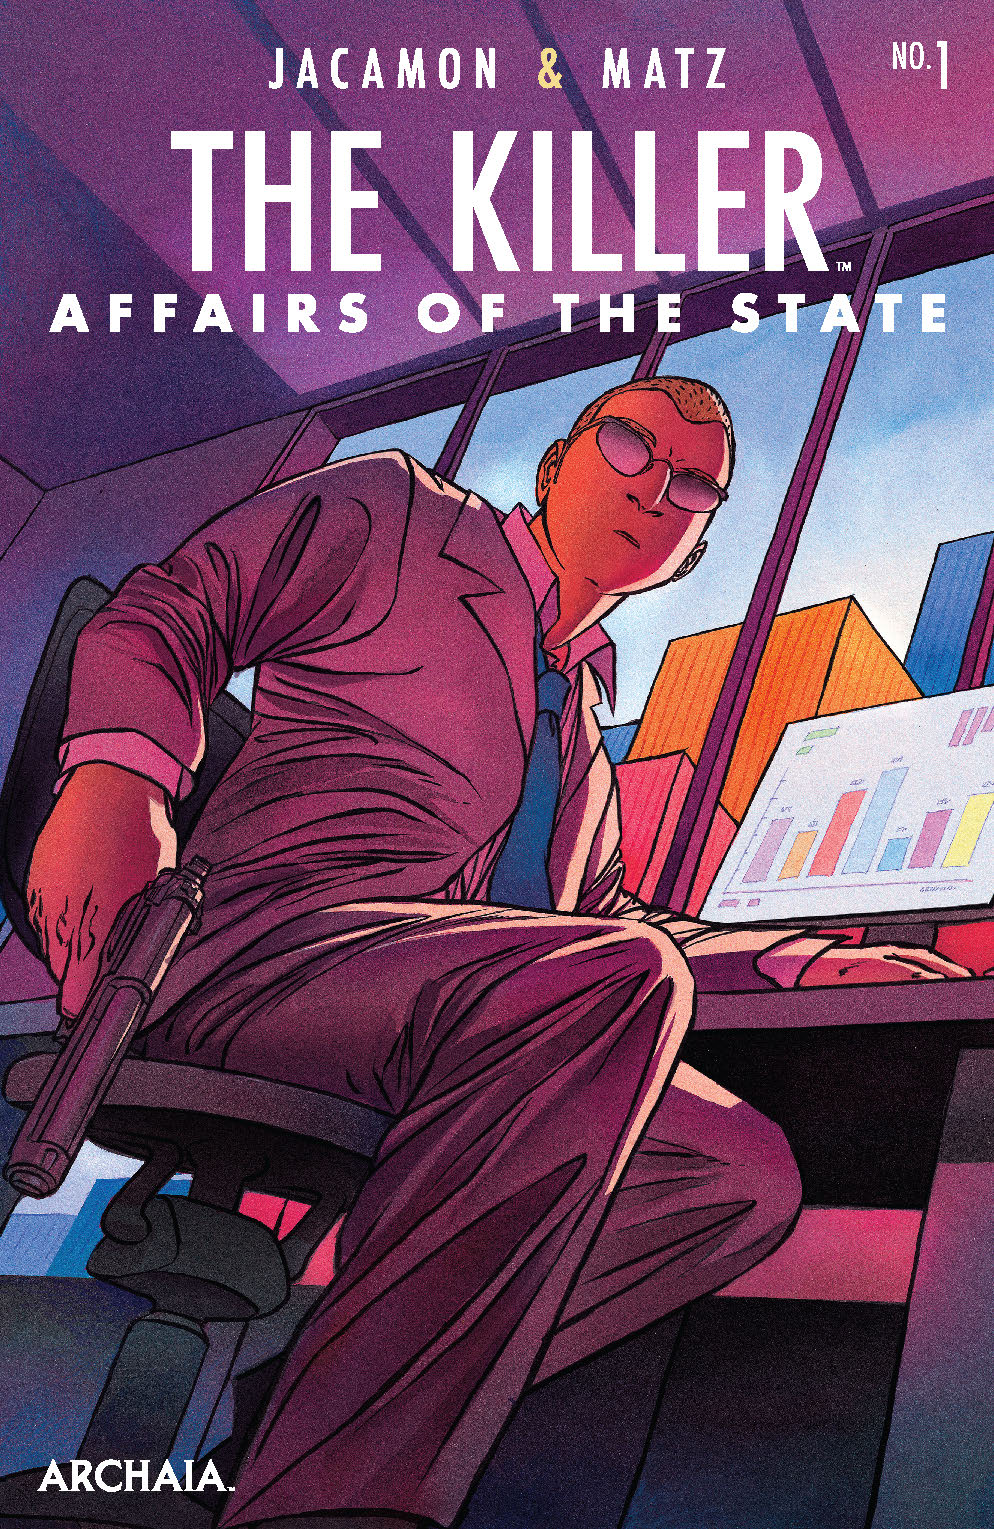 The Killer: Affairs of the State #1